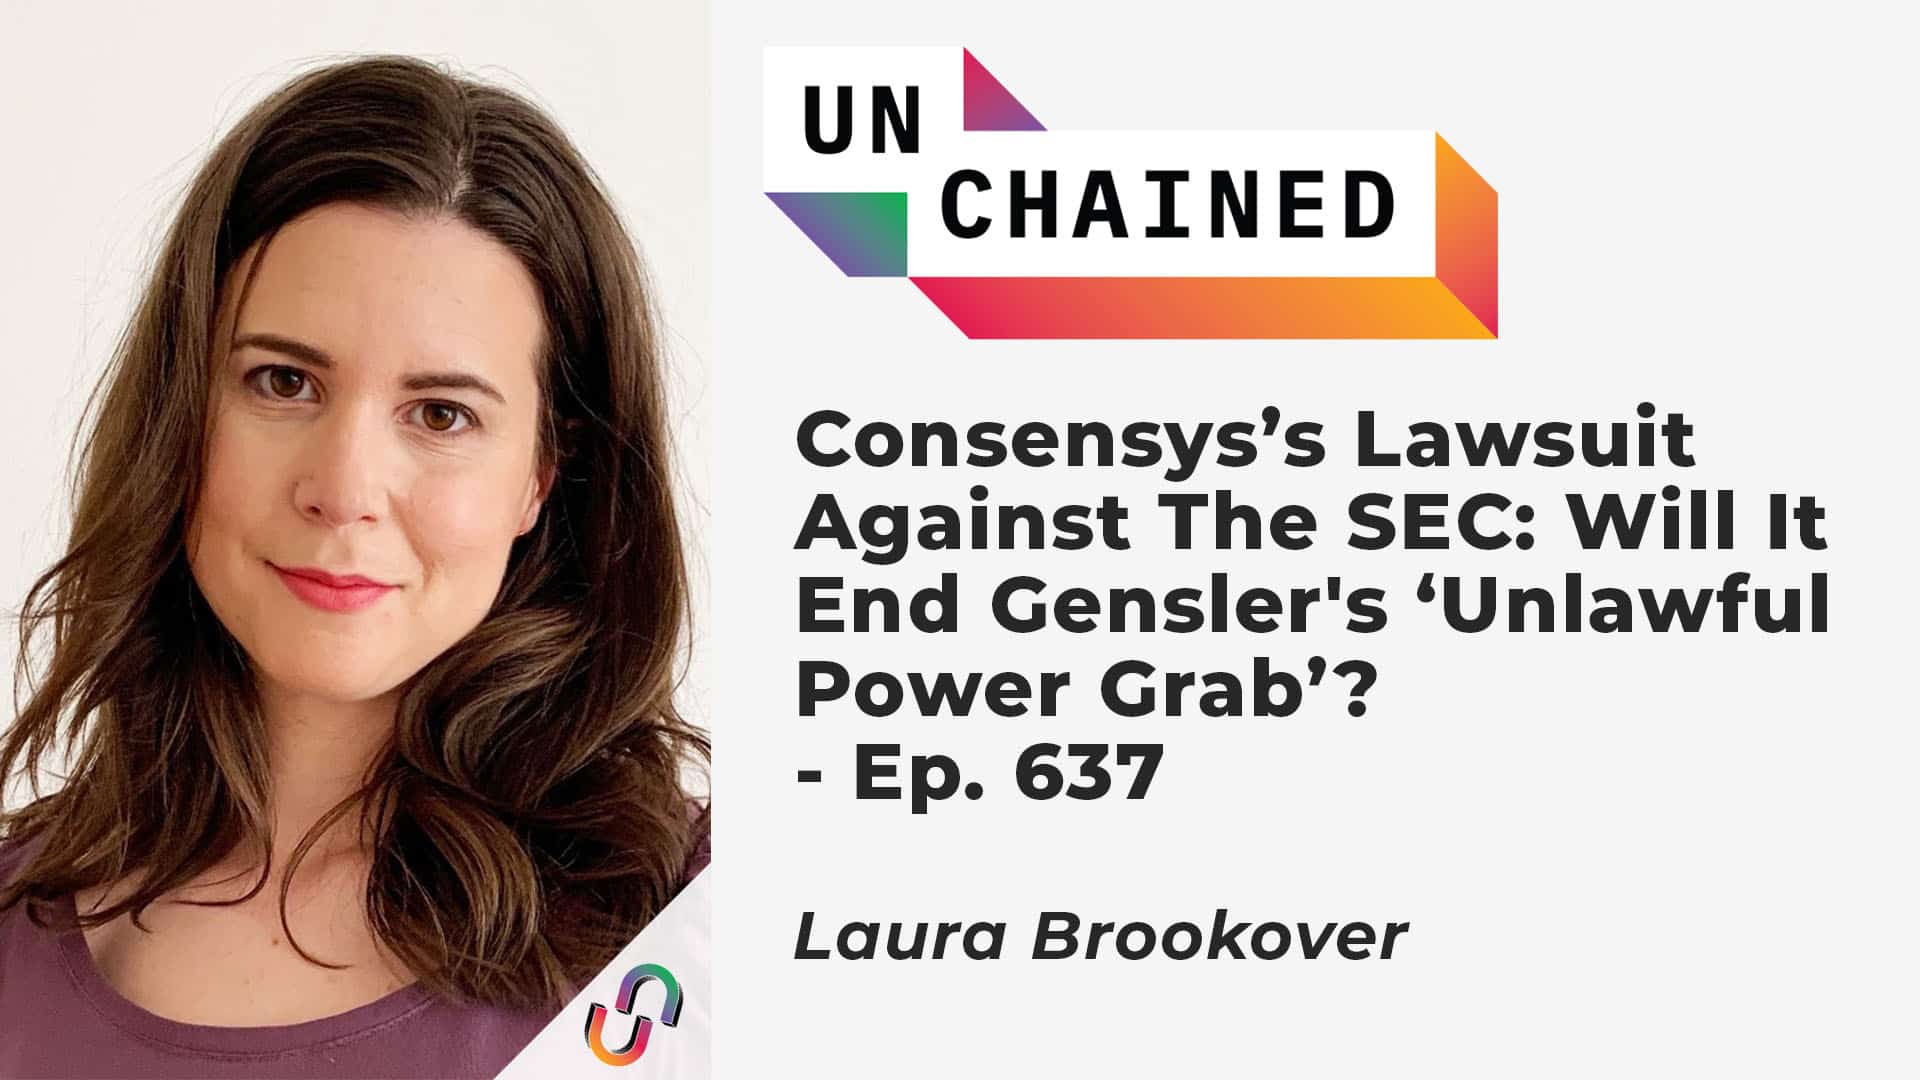 Consensys’s Lawsuit Against The SEC: Will It End Gensler's ‘Unlawful Power Grab’? - Ep. 637